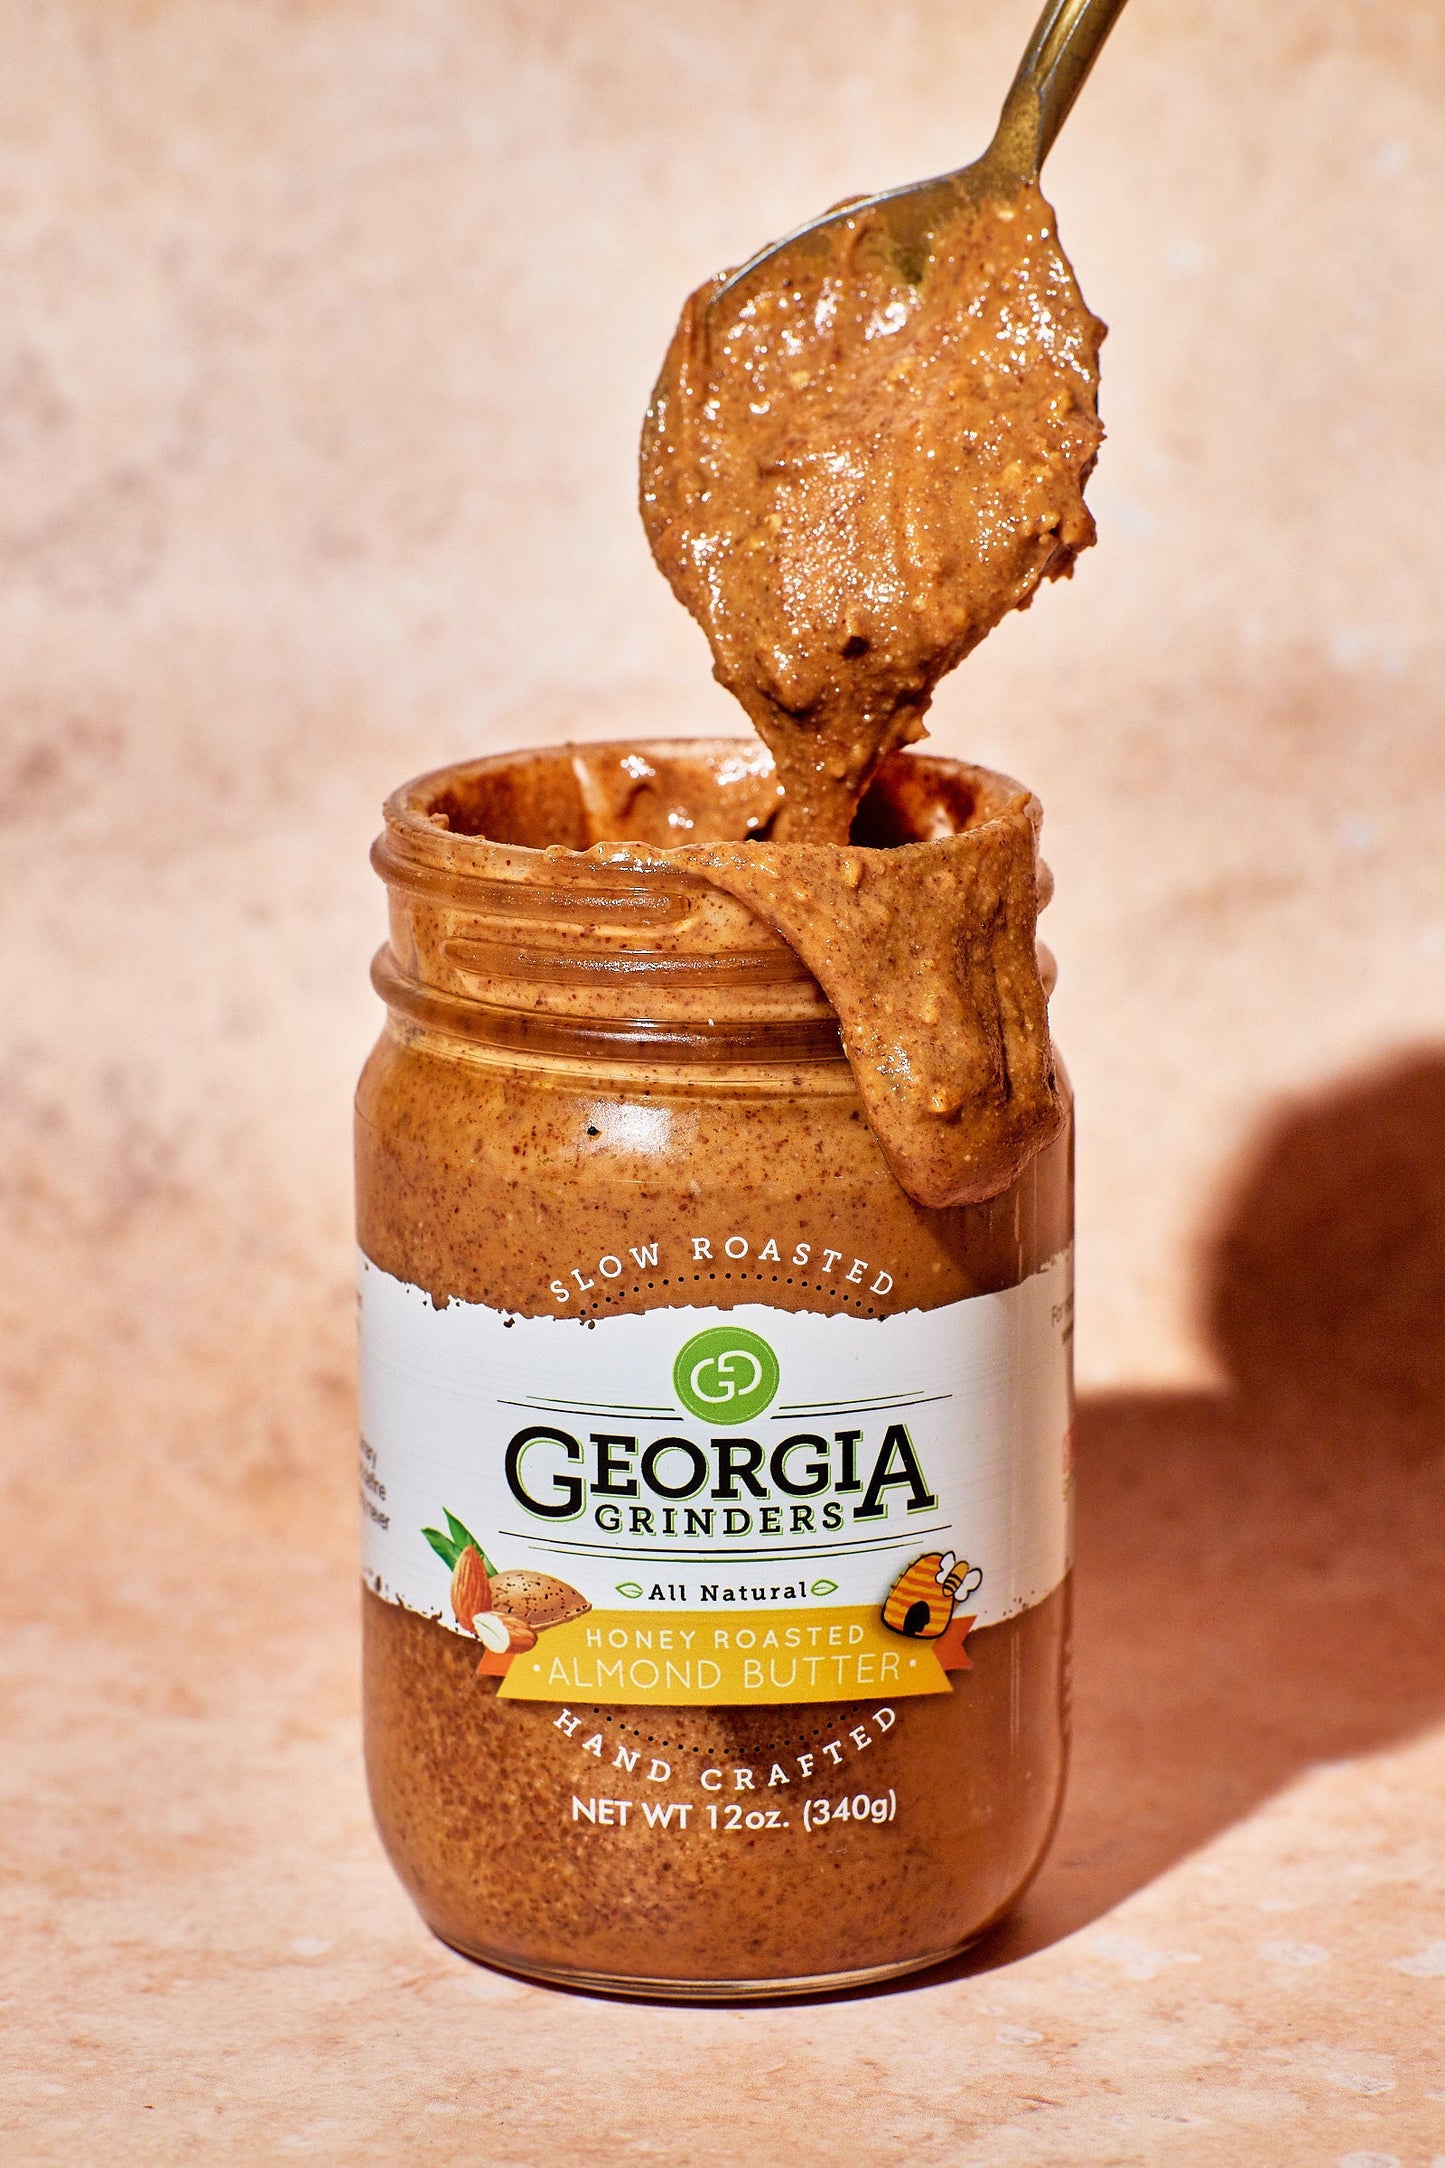 Georgia Grinders Almond Butter Assorted 4 Pack (One 12oz jar of each: Original Almond Butter, Maple Caramel Almond Butter, Salt Free Almond Butter, Honey Roasted Almond Butter - (CP-CL) by Georgia Grinders